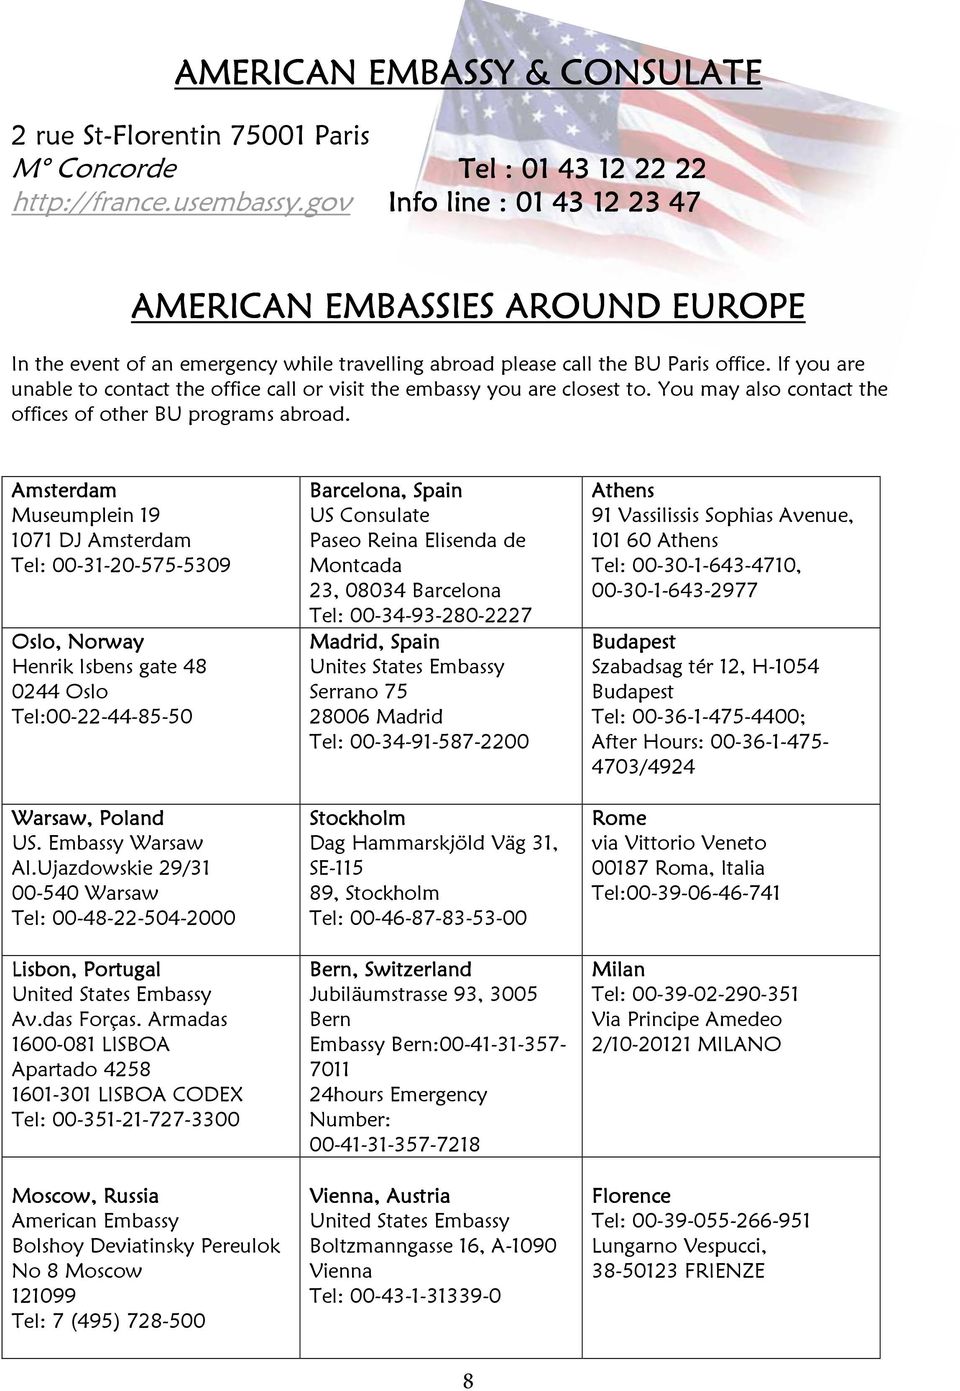 If you are unable to contact the office call or visit the embassy you are closest to. You may also contact the offices of other BU programs abroad.